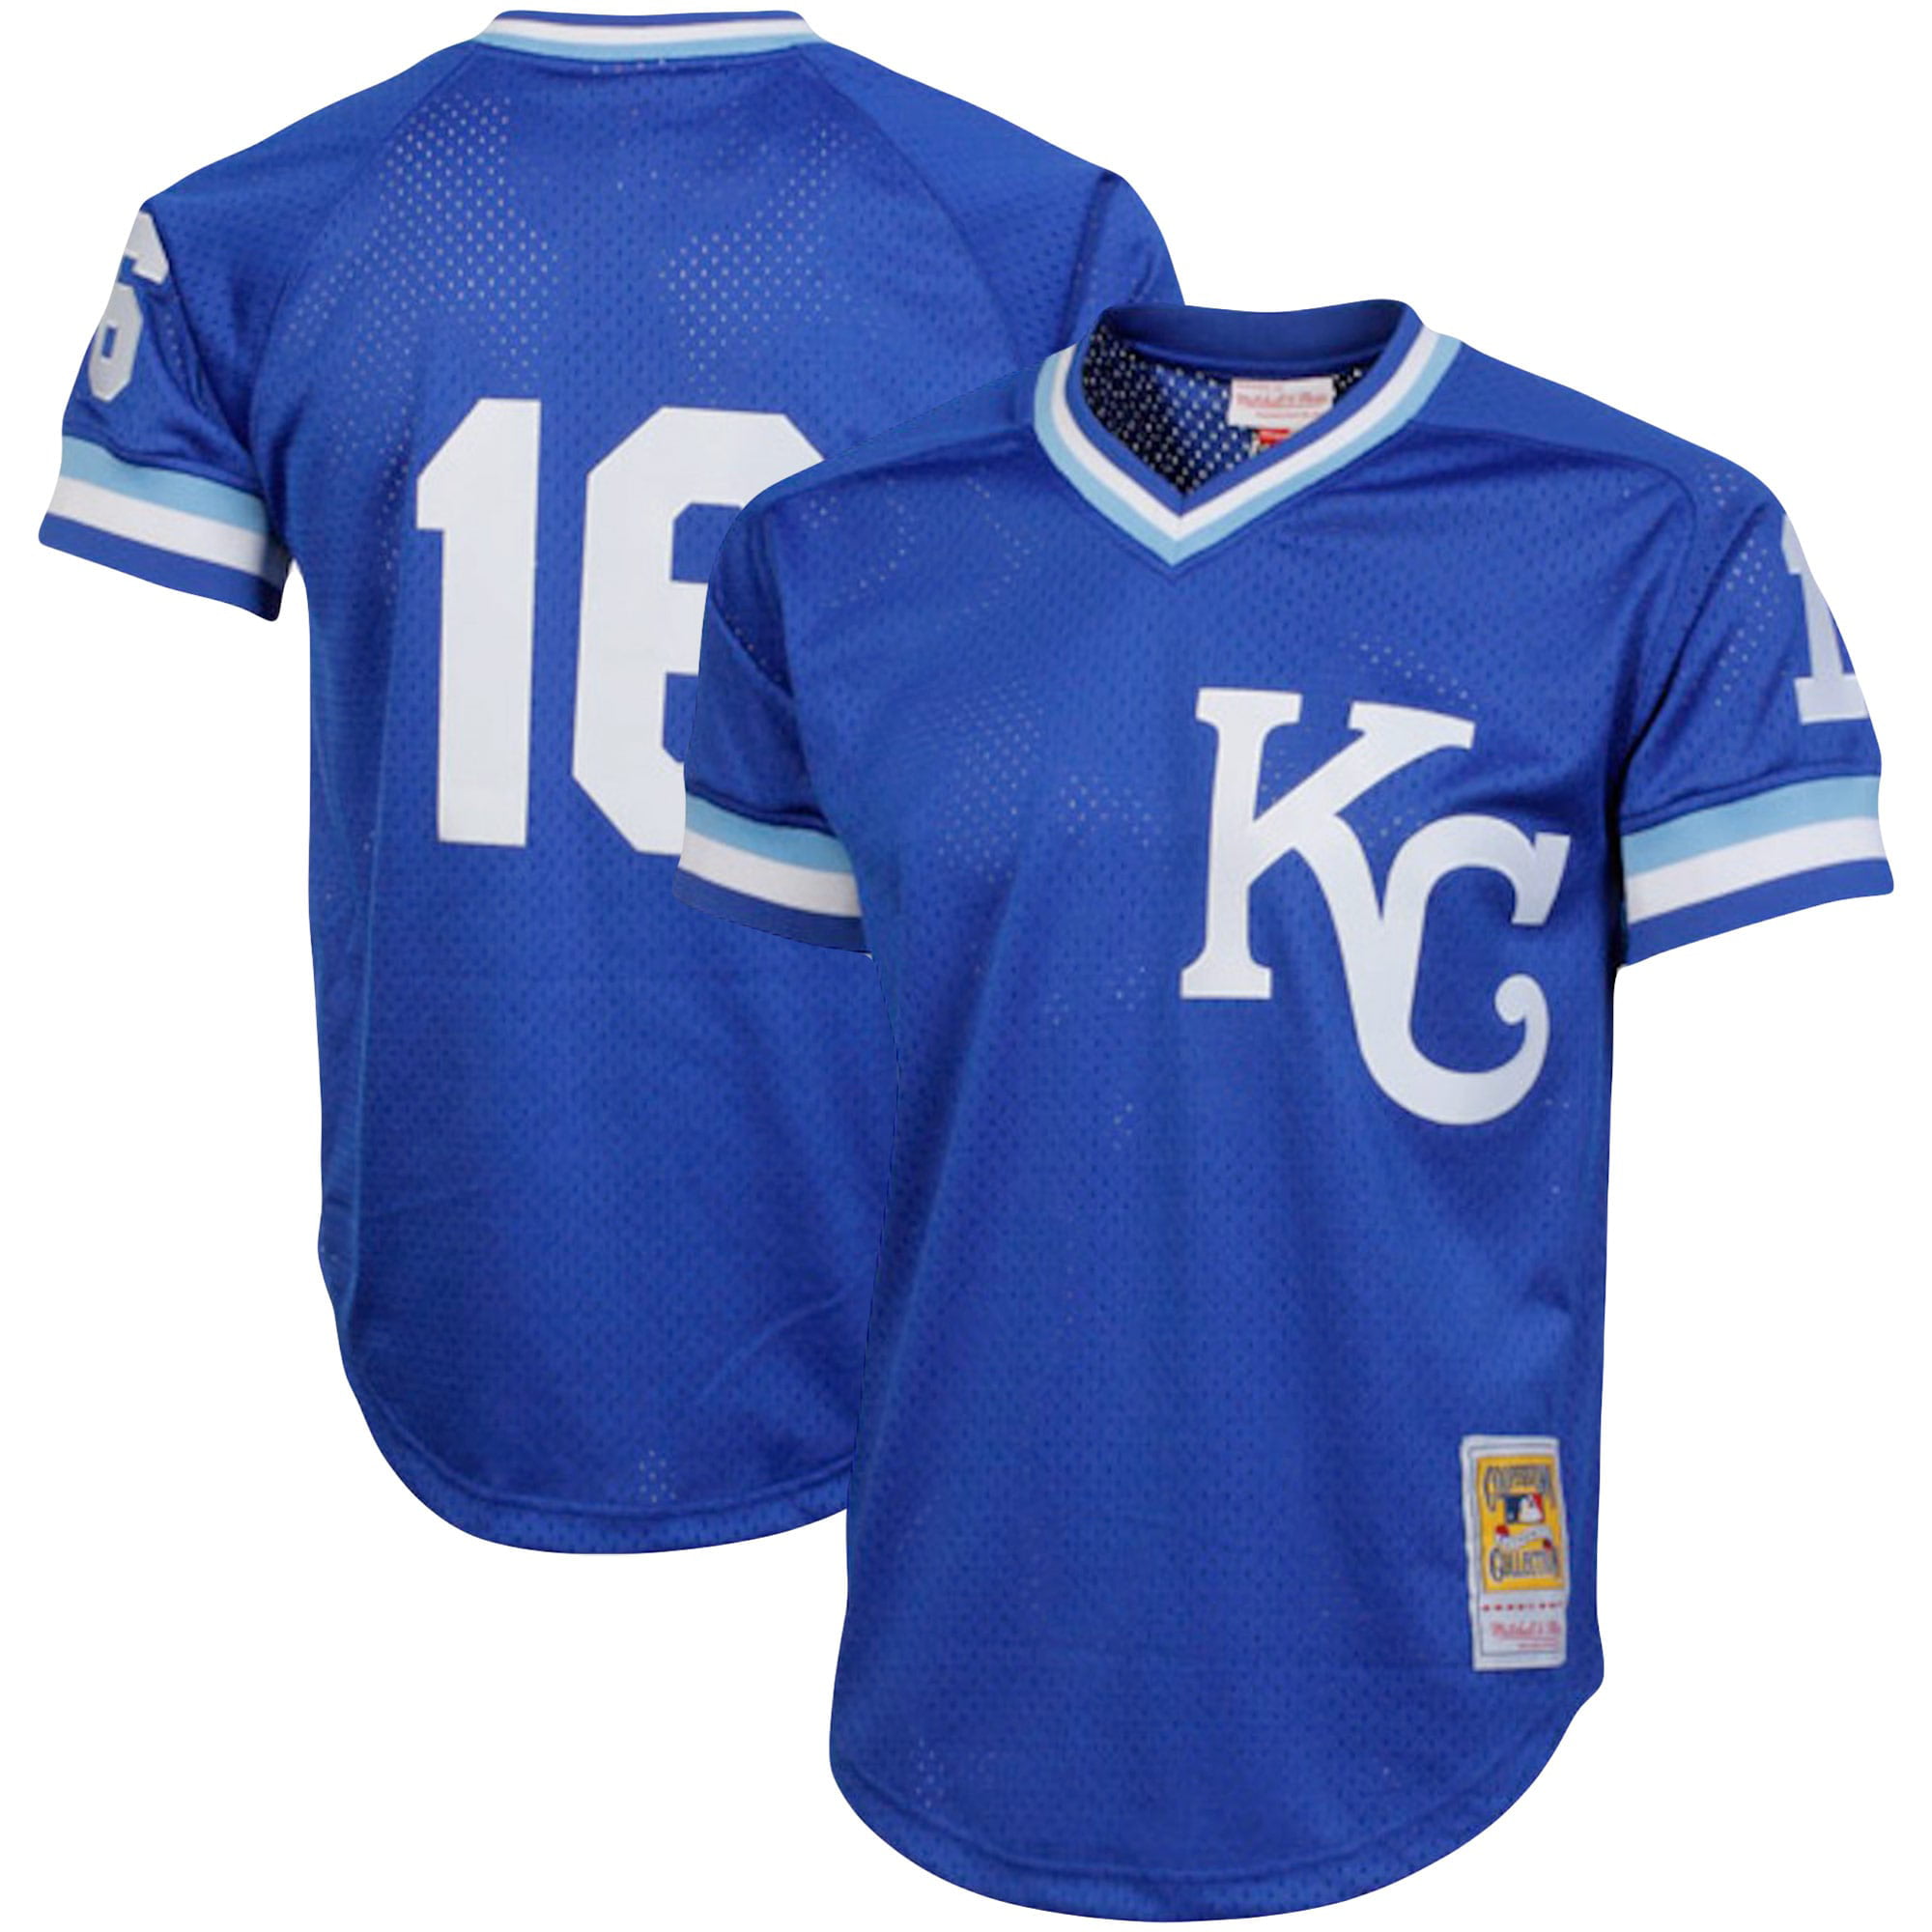 royals fourth of july jersey